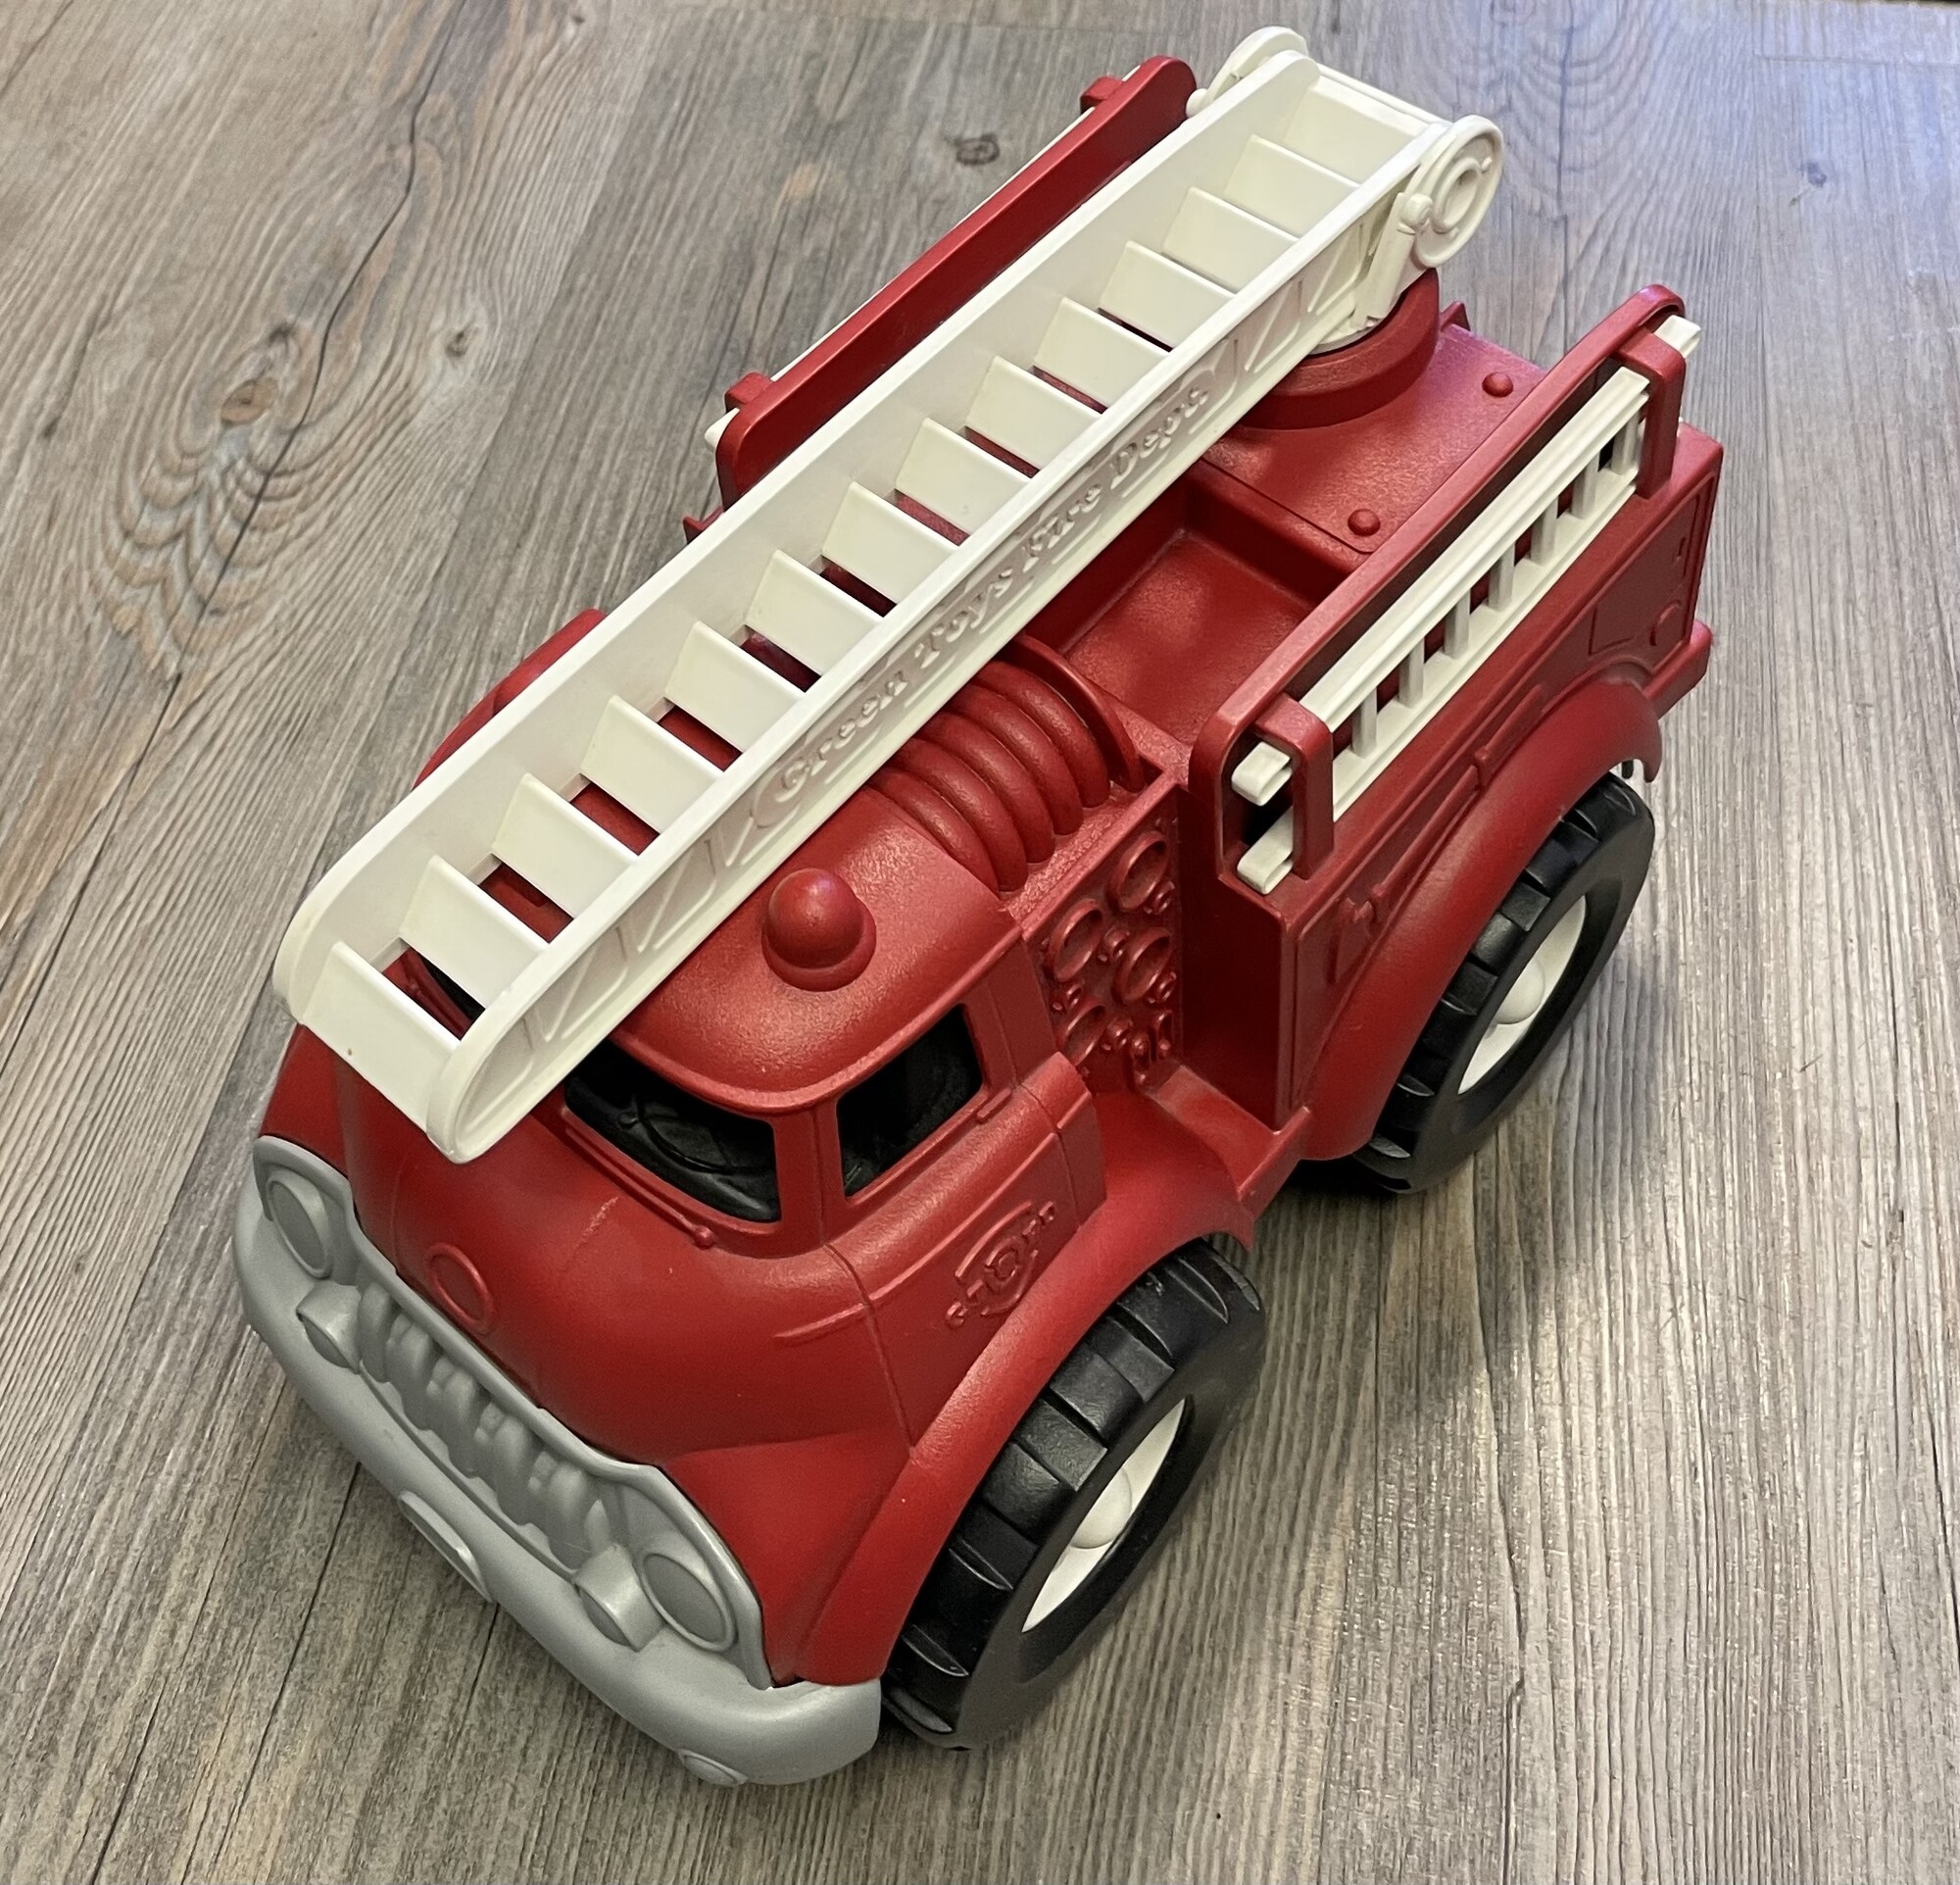 Greentoys Fire Truck, Red, Size: 24M